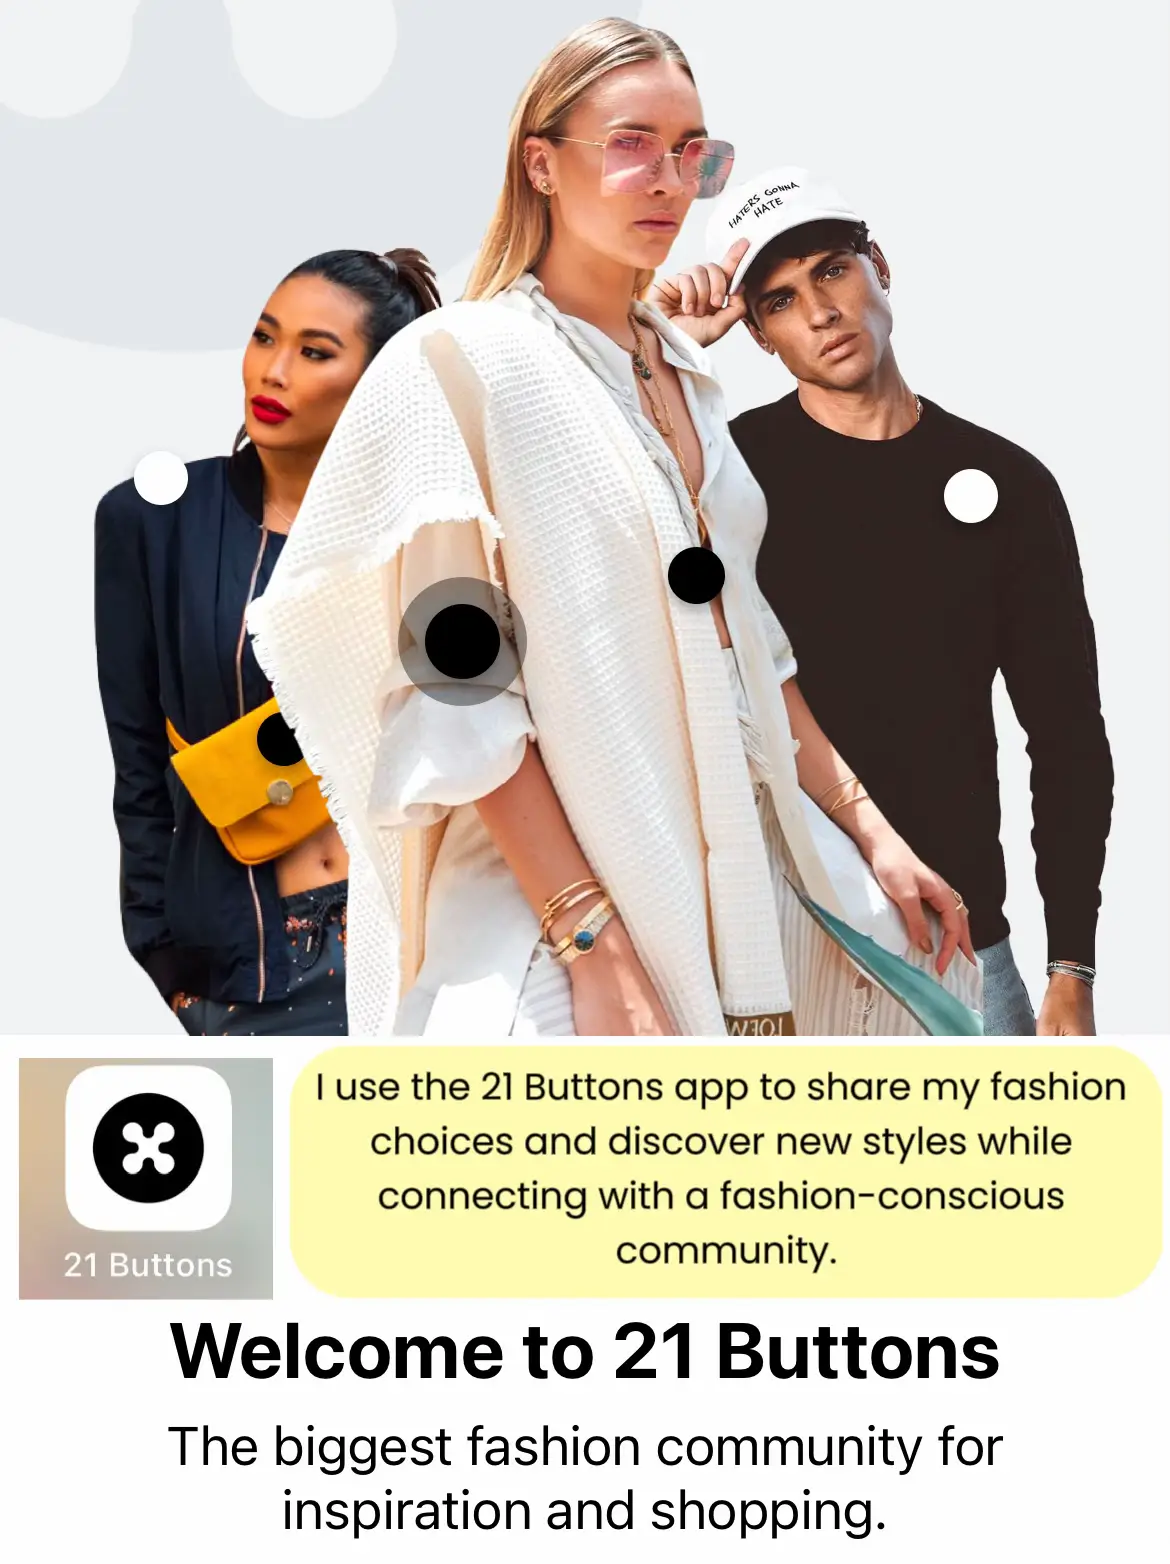 emerging technology for fashion apps - Lemon8 Search